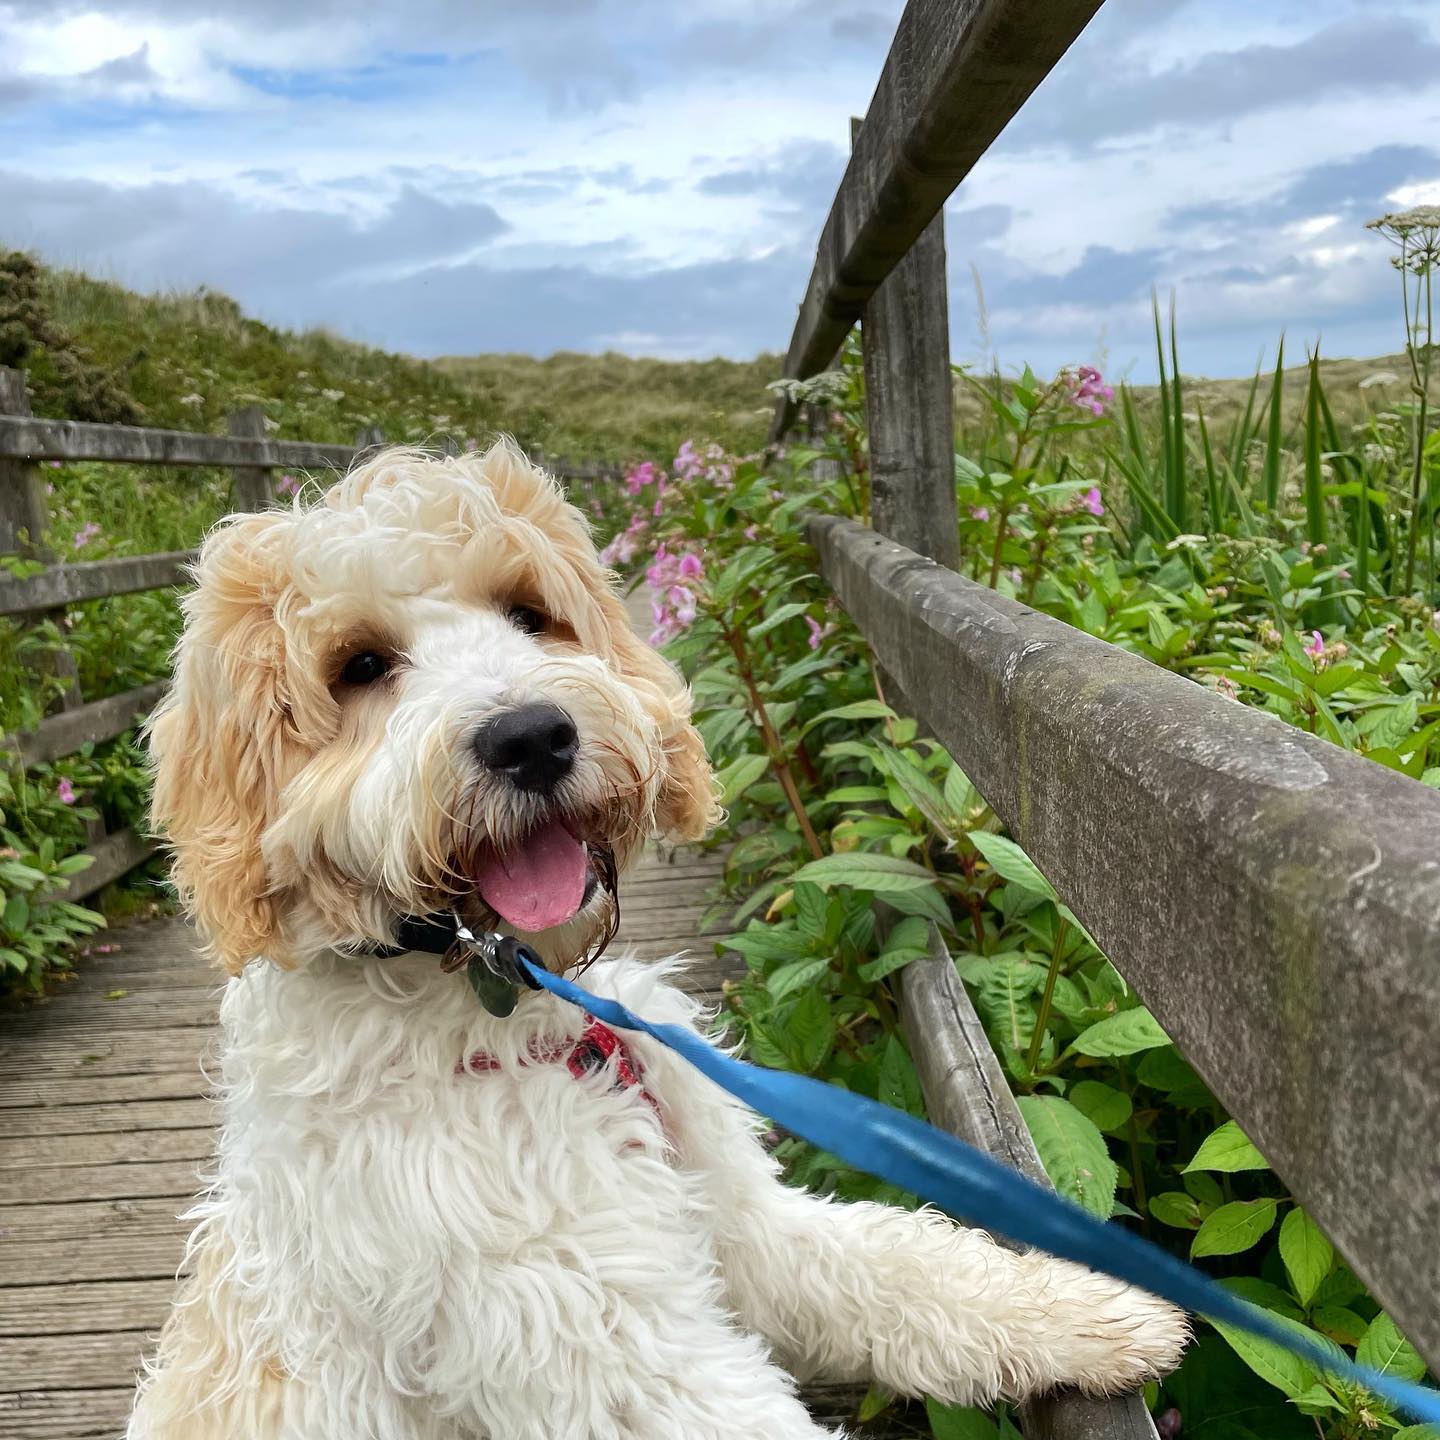 The last week has been spent on the north coast, with lots and lots puppy walks. When I dreamed of getting a puppy this was exactly what I was looking forward to – coastal walks, taking photos, meeting lots of other dogs and their owners …. having lots of chats about breeds, size and fluffy fur coats!